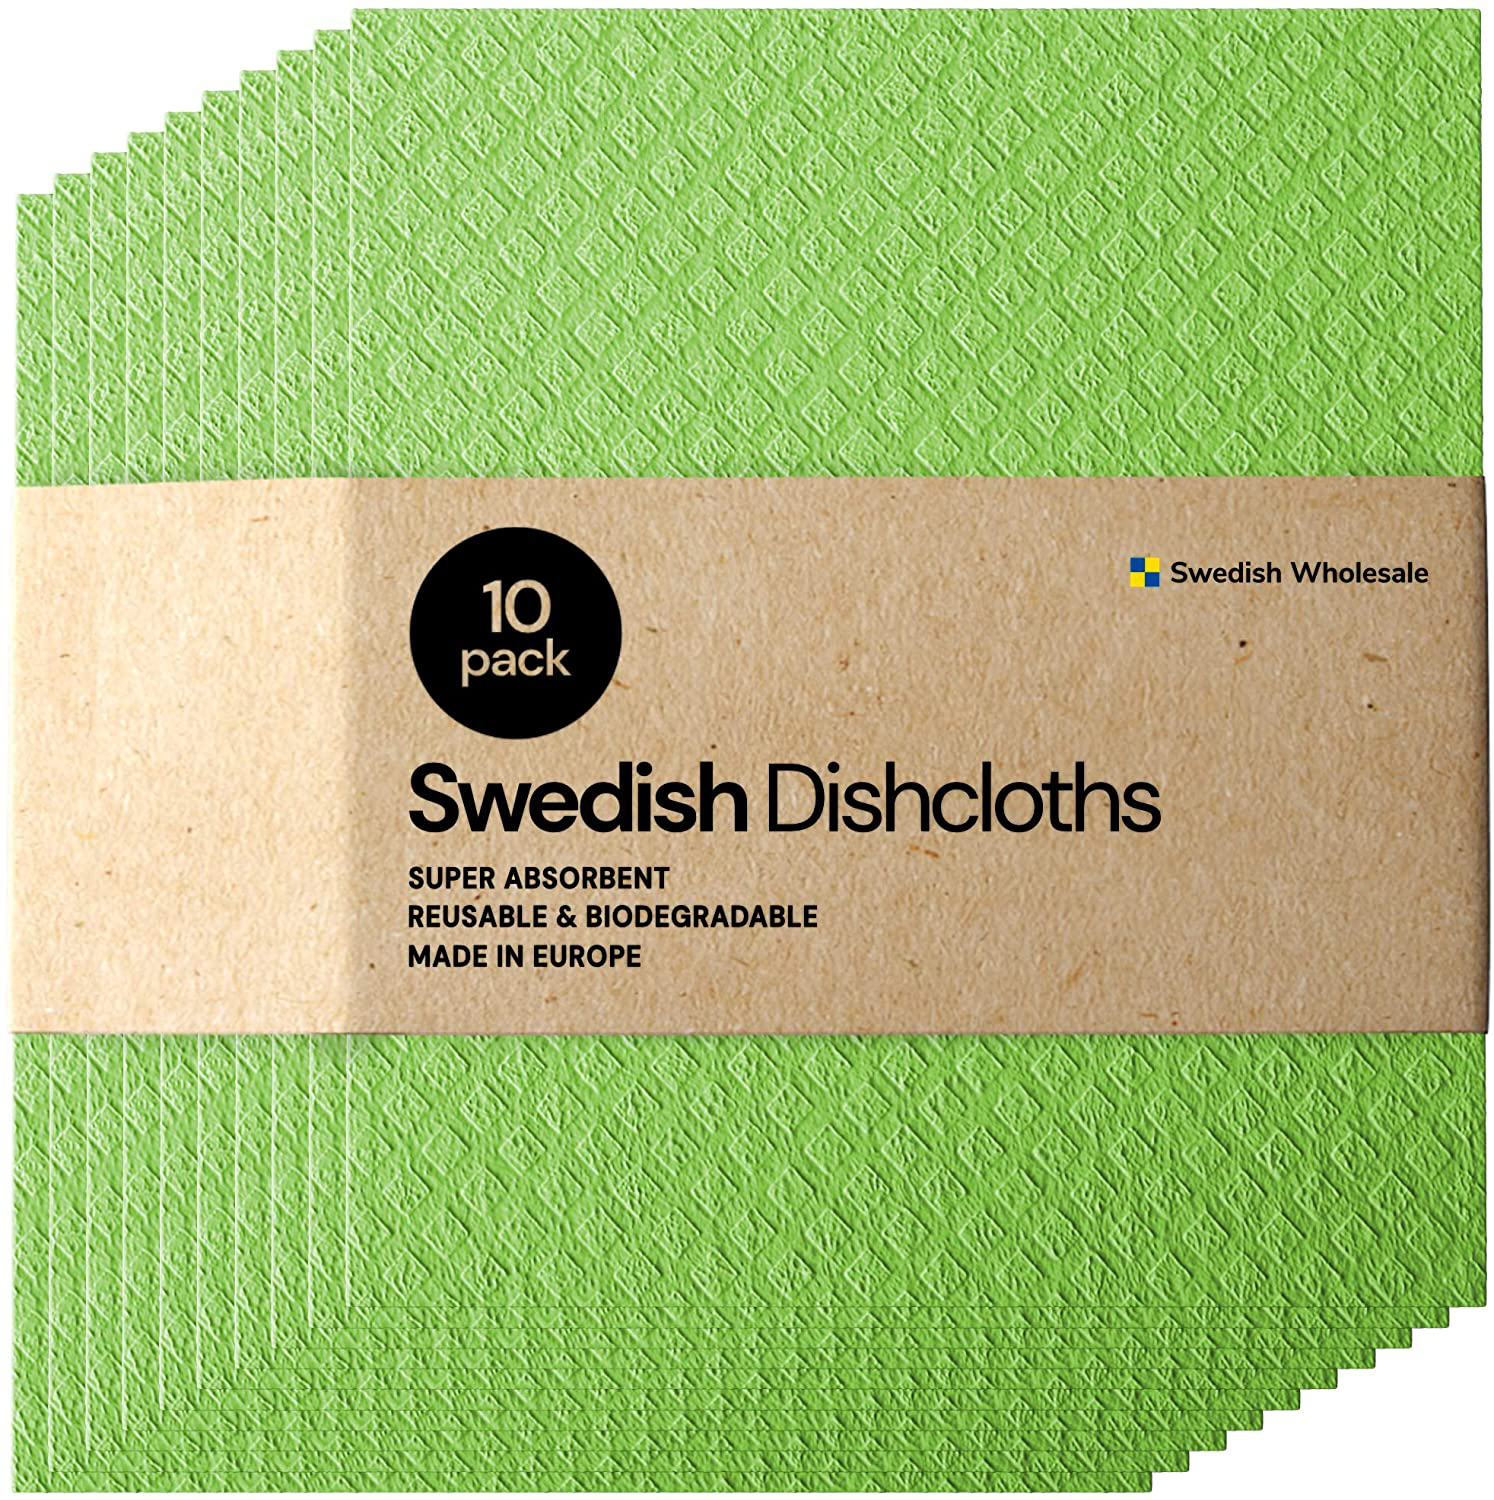 Swedish Dishcloth Cellulose Sponge Cloths - Bulk 10 Pack of Eco-Friendly No Odor Reusable Cleaning Cloths for Kitchen - Absorbent Dish Cloth Hand Towel